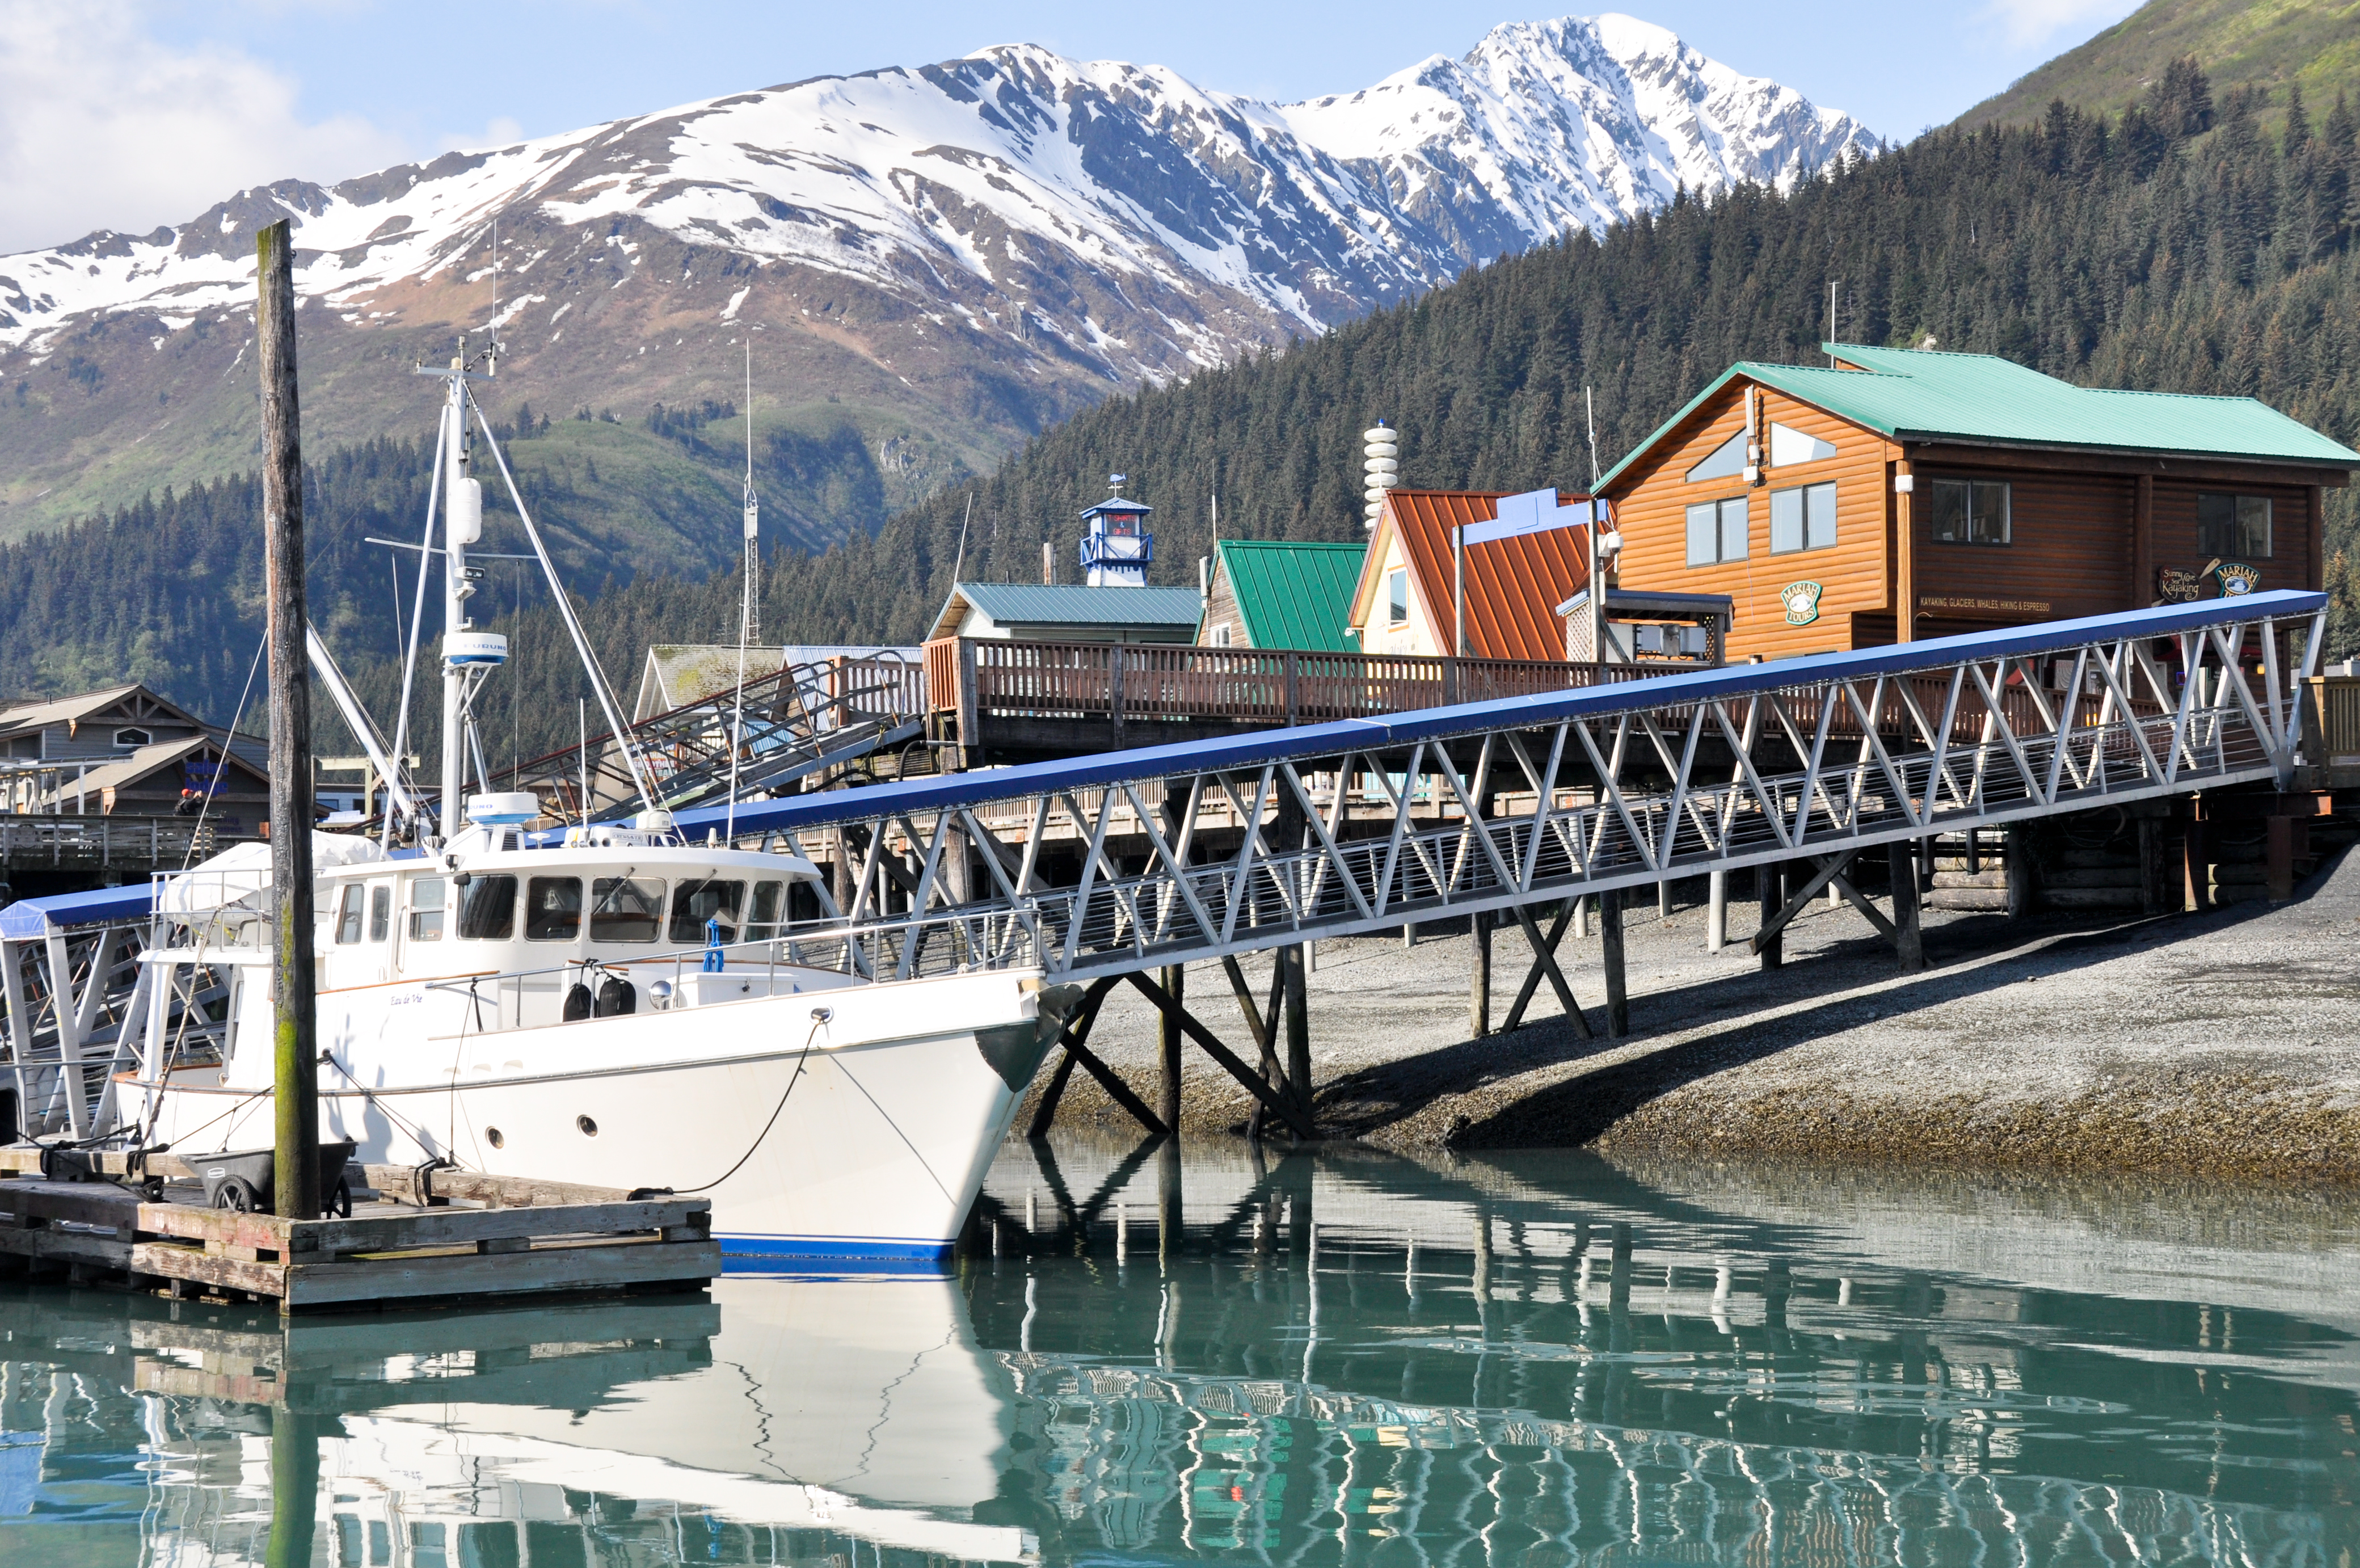 Experience an Amazing Vacation in Alaska in 8 Days with Your Family - Seward Bay Harbor in Alaska